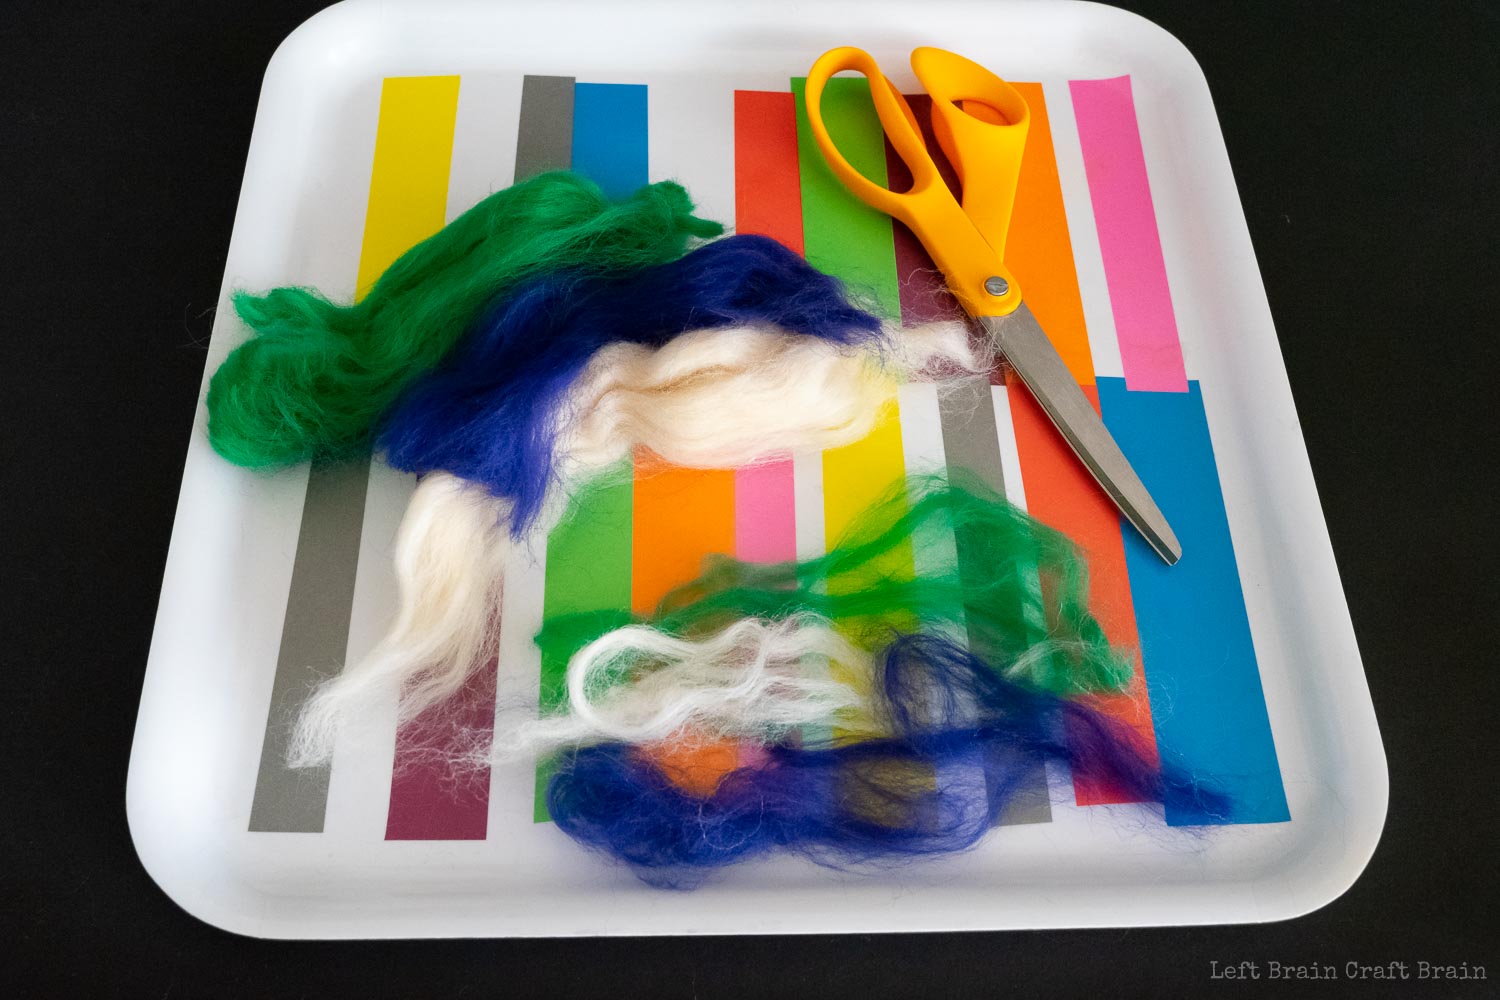 pull strands of multiple colors into long pieces to make striped felt balls